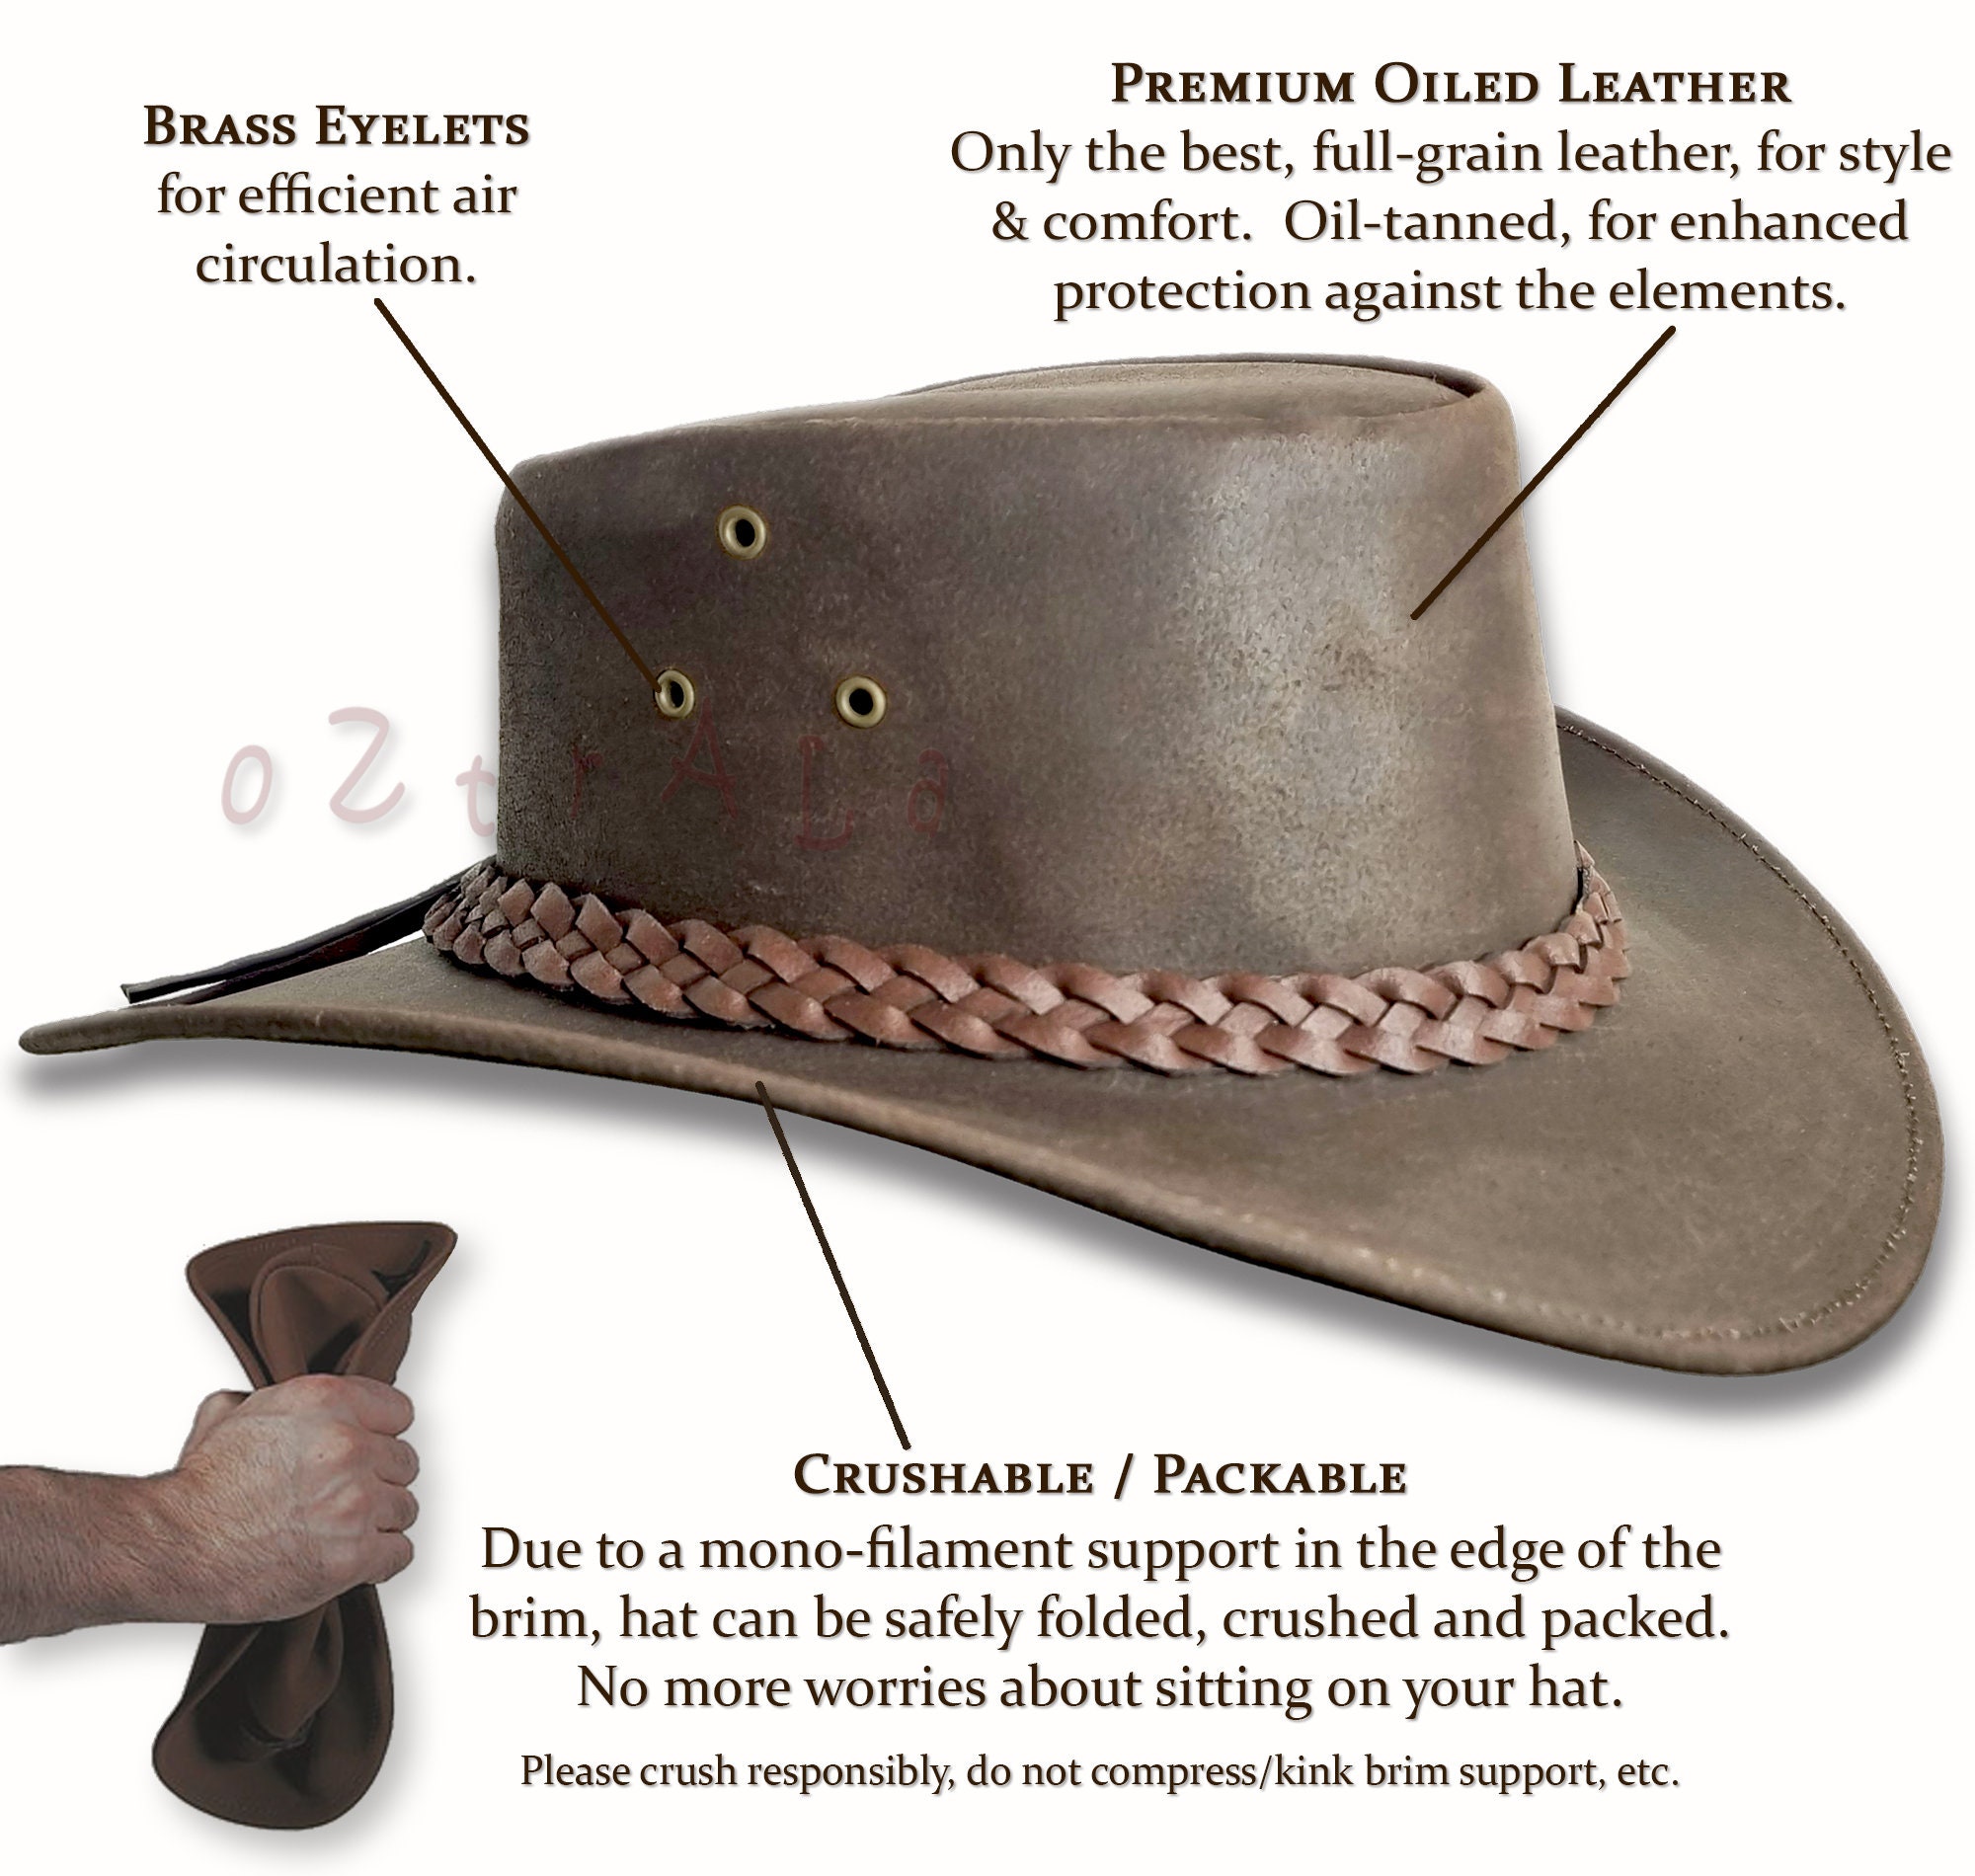 Orvis Bakewell - The Oilcloth Outback Hat - The only hat you'll